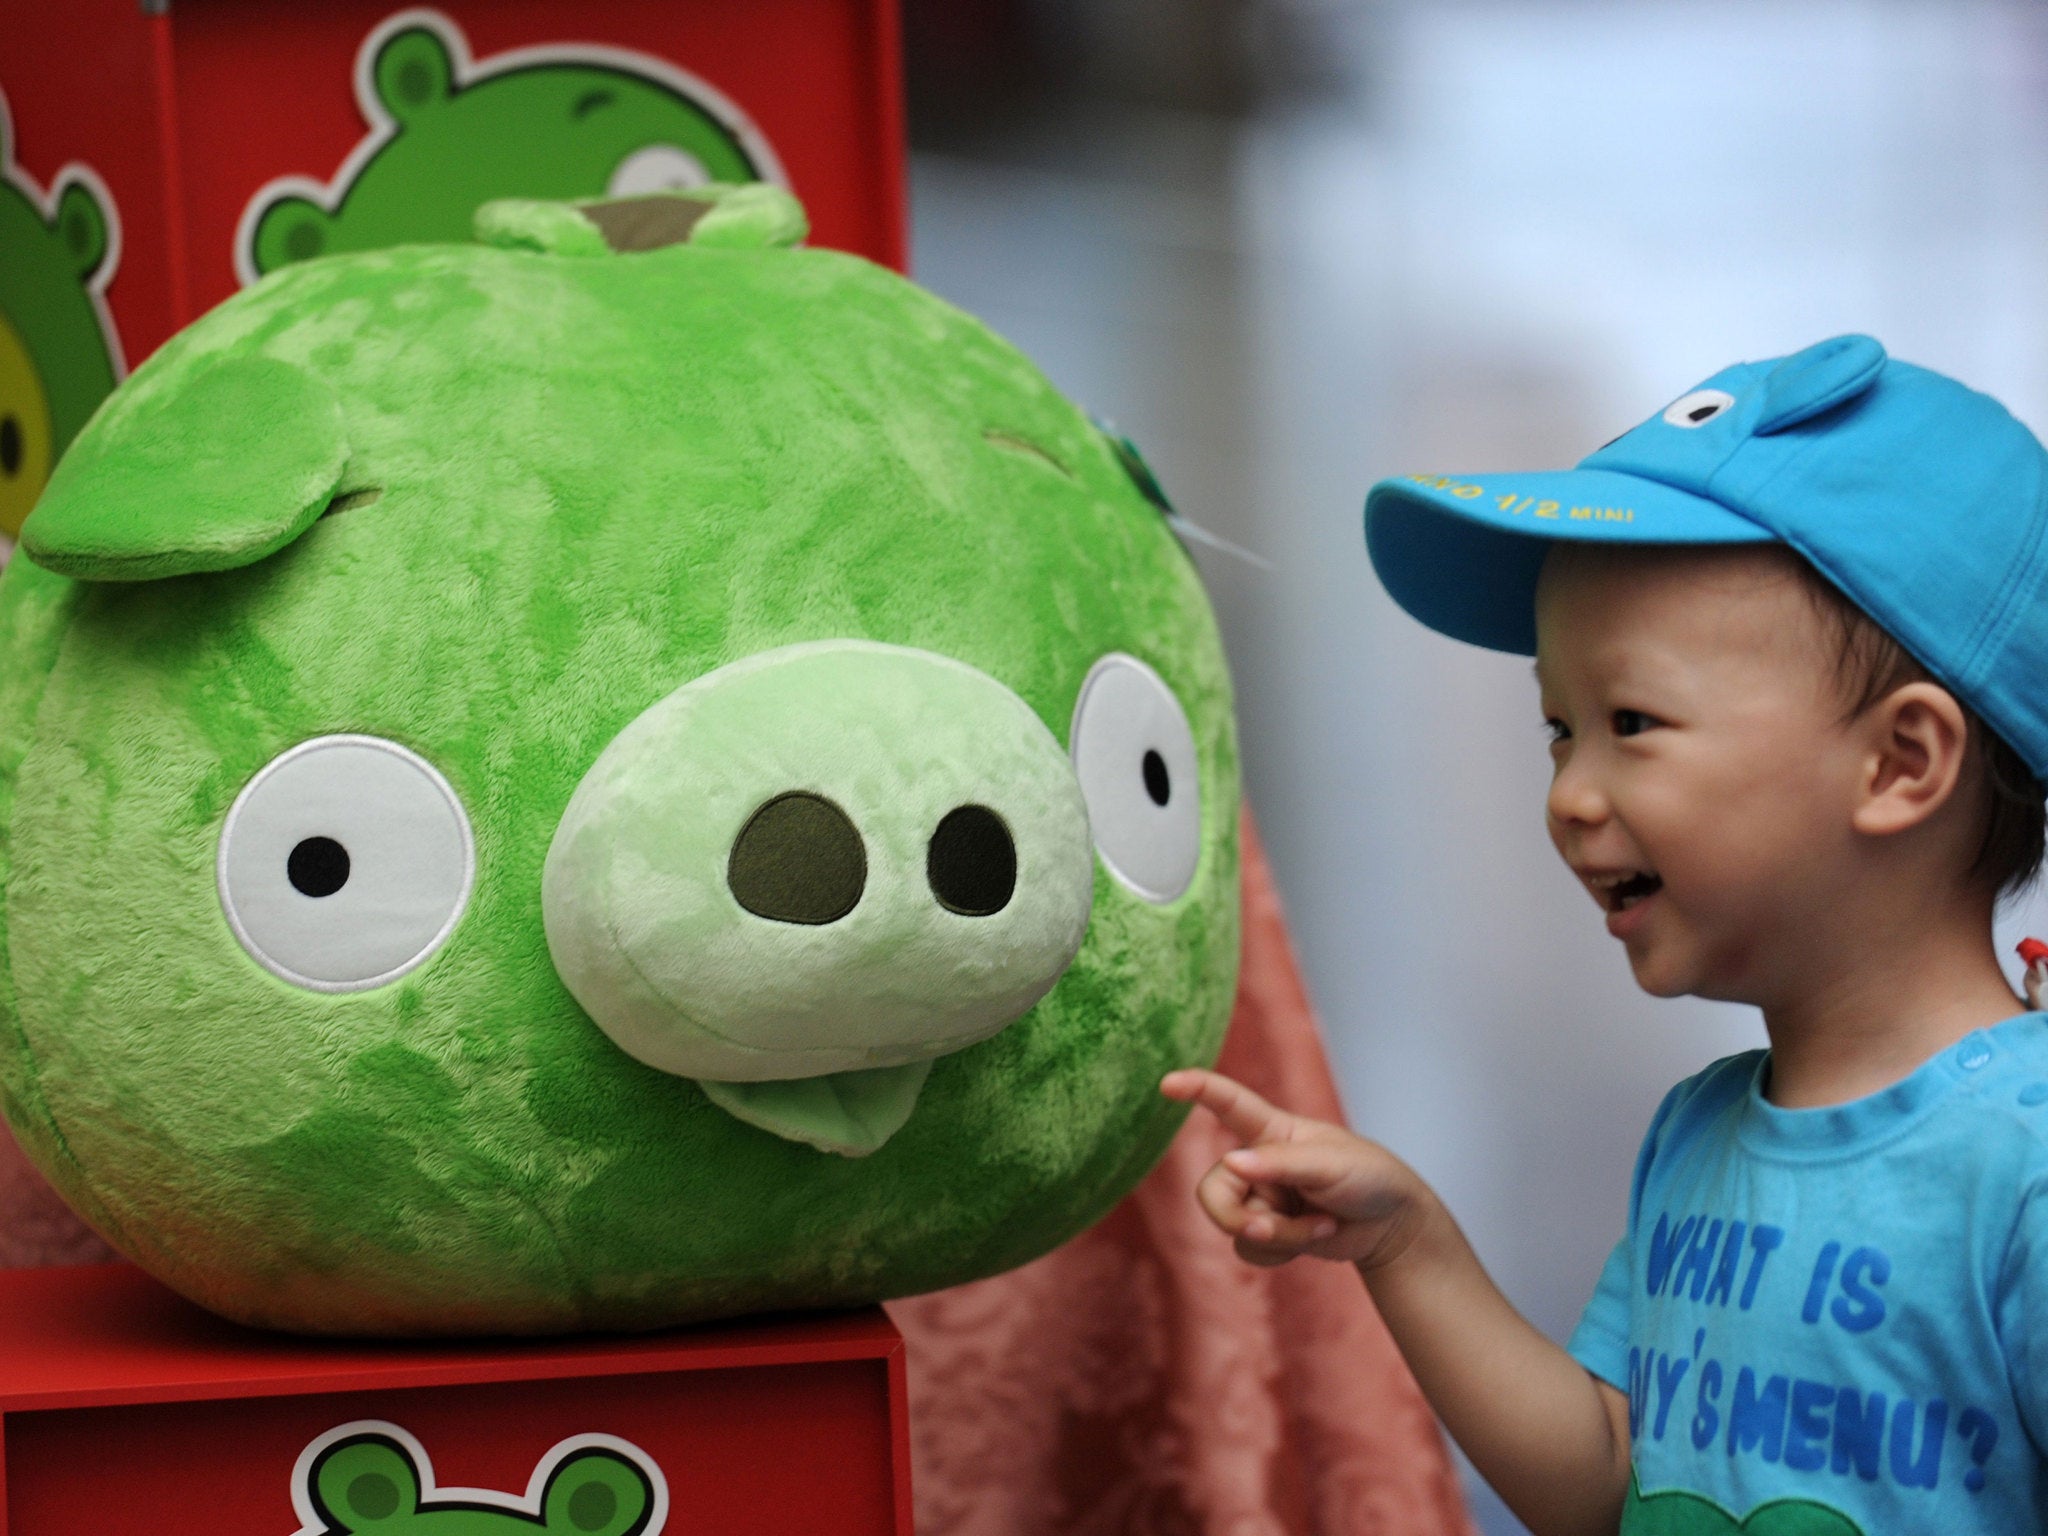 A child touches a Bad Piggies stuffed toy from the Angry Birds game during a press conference in Taipei on September 27, 2012